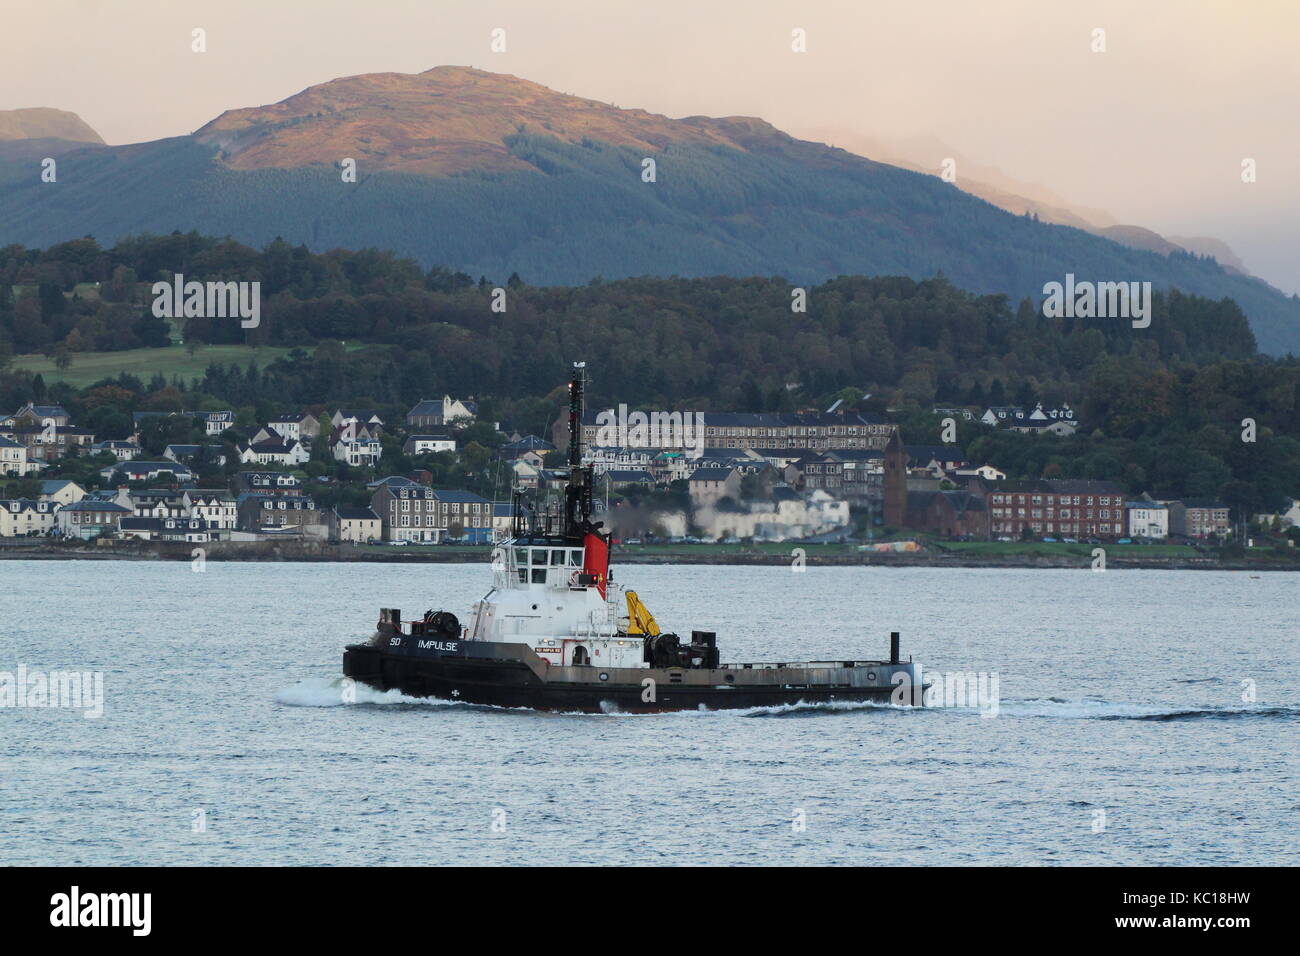 SD Impulse, a Clyde-based Impulse-class tug operated by Serco Marine Services, passing Gourock during the arrivals for Exercise Joint Warrior 17-2. Stock Photo